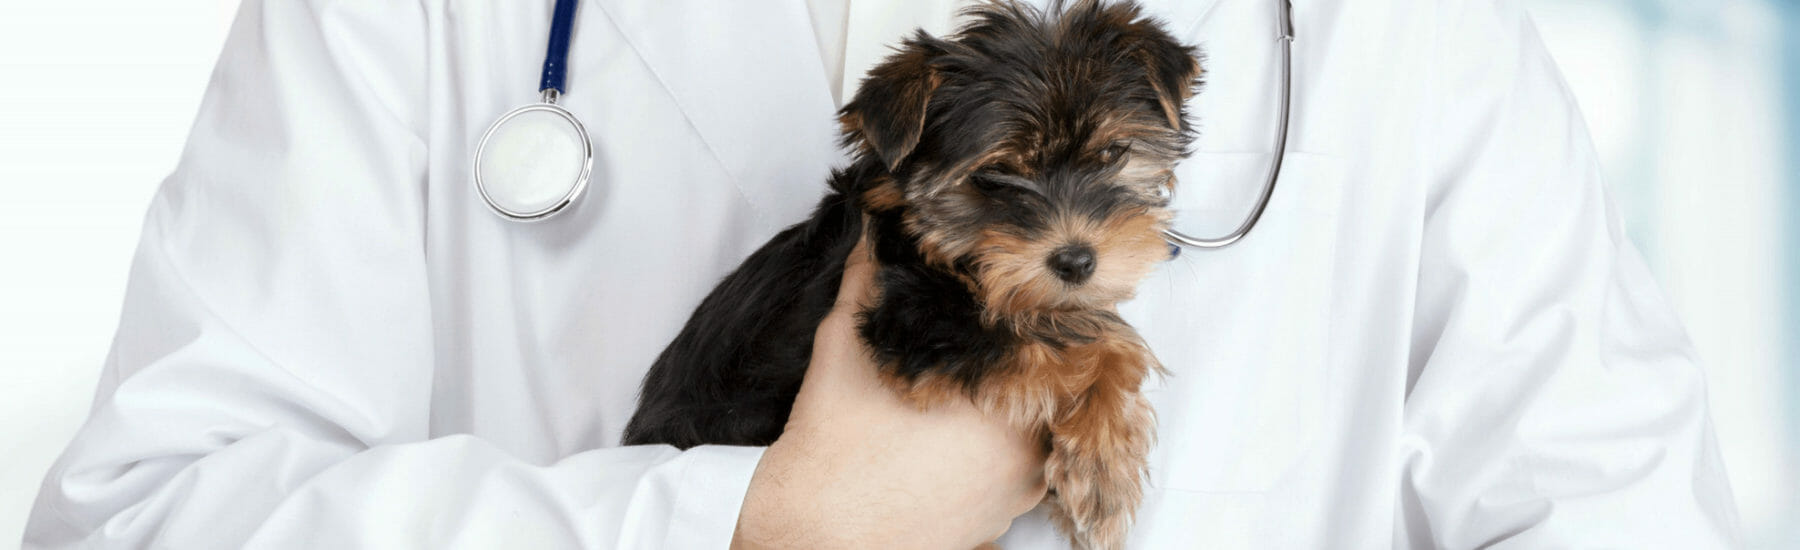 Small black and white dog being held by a veterinarian